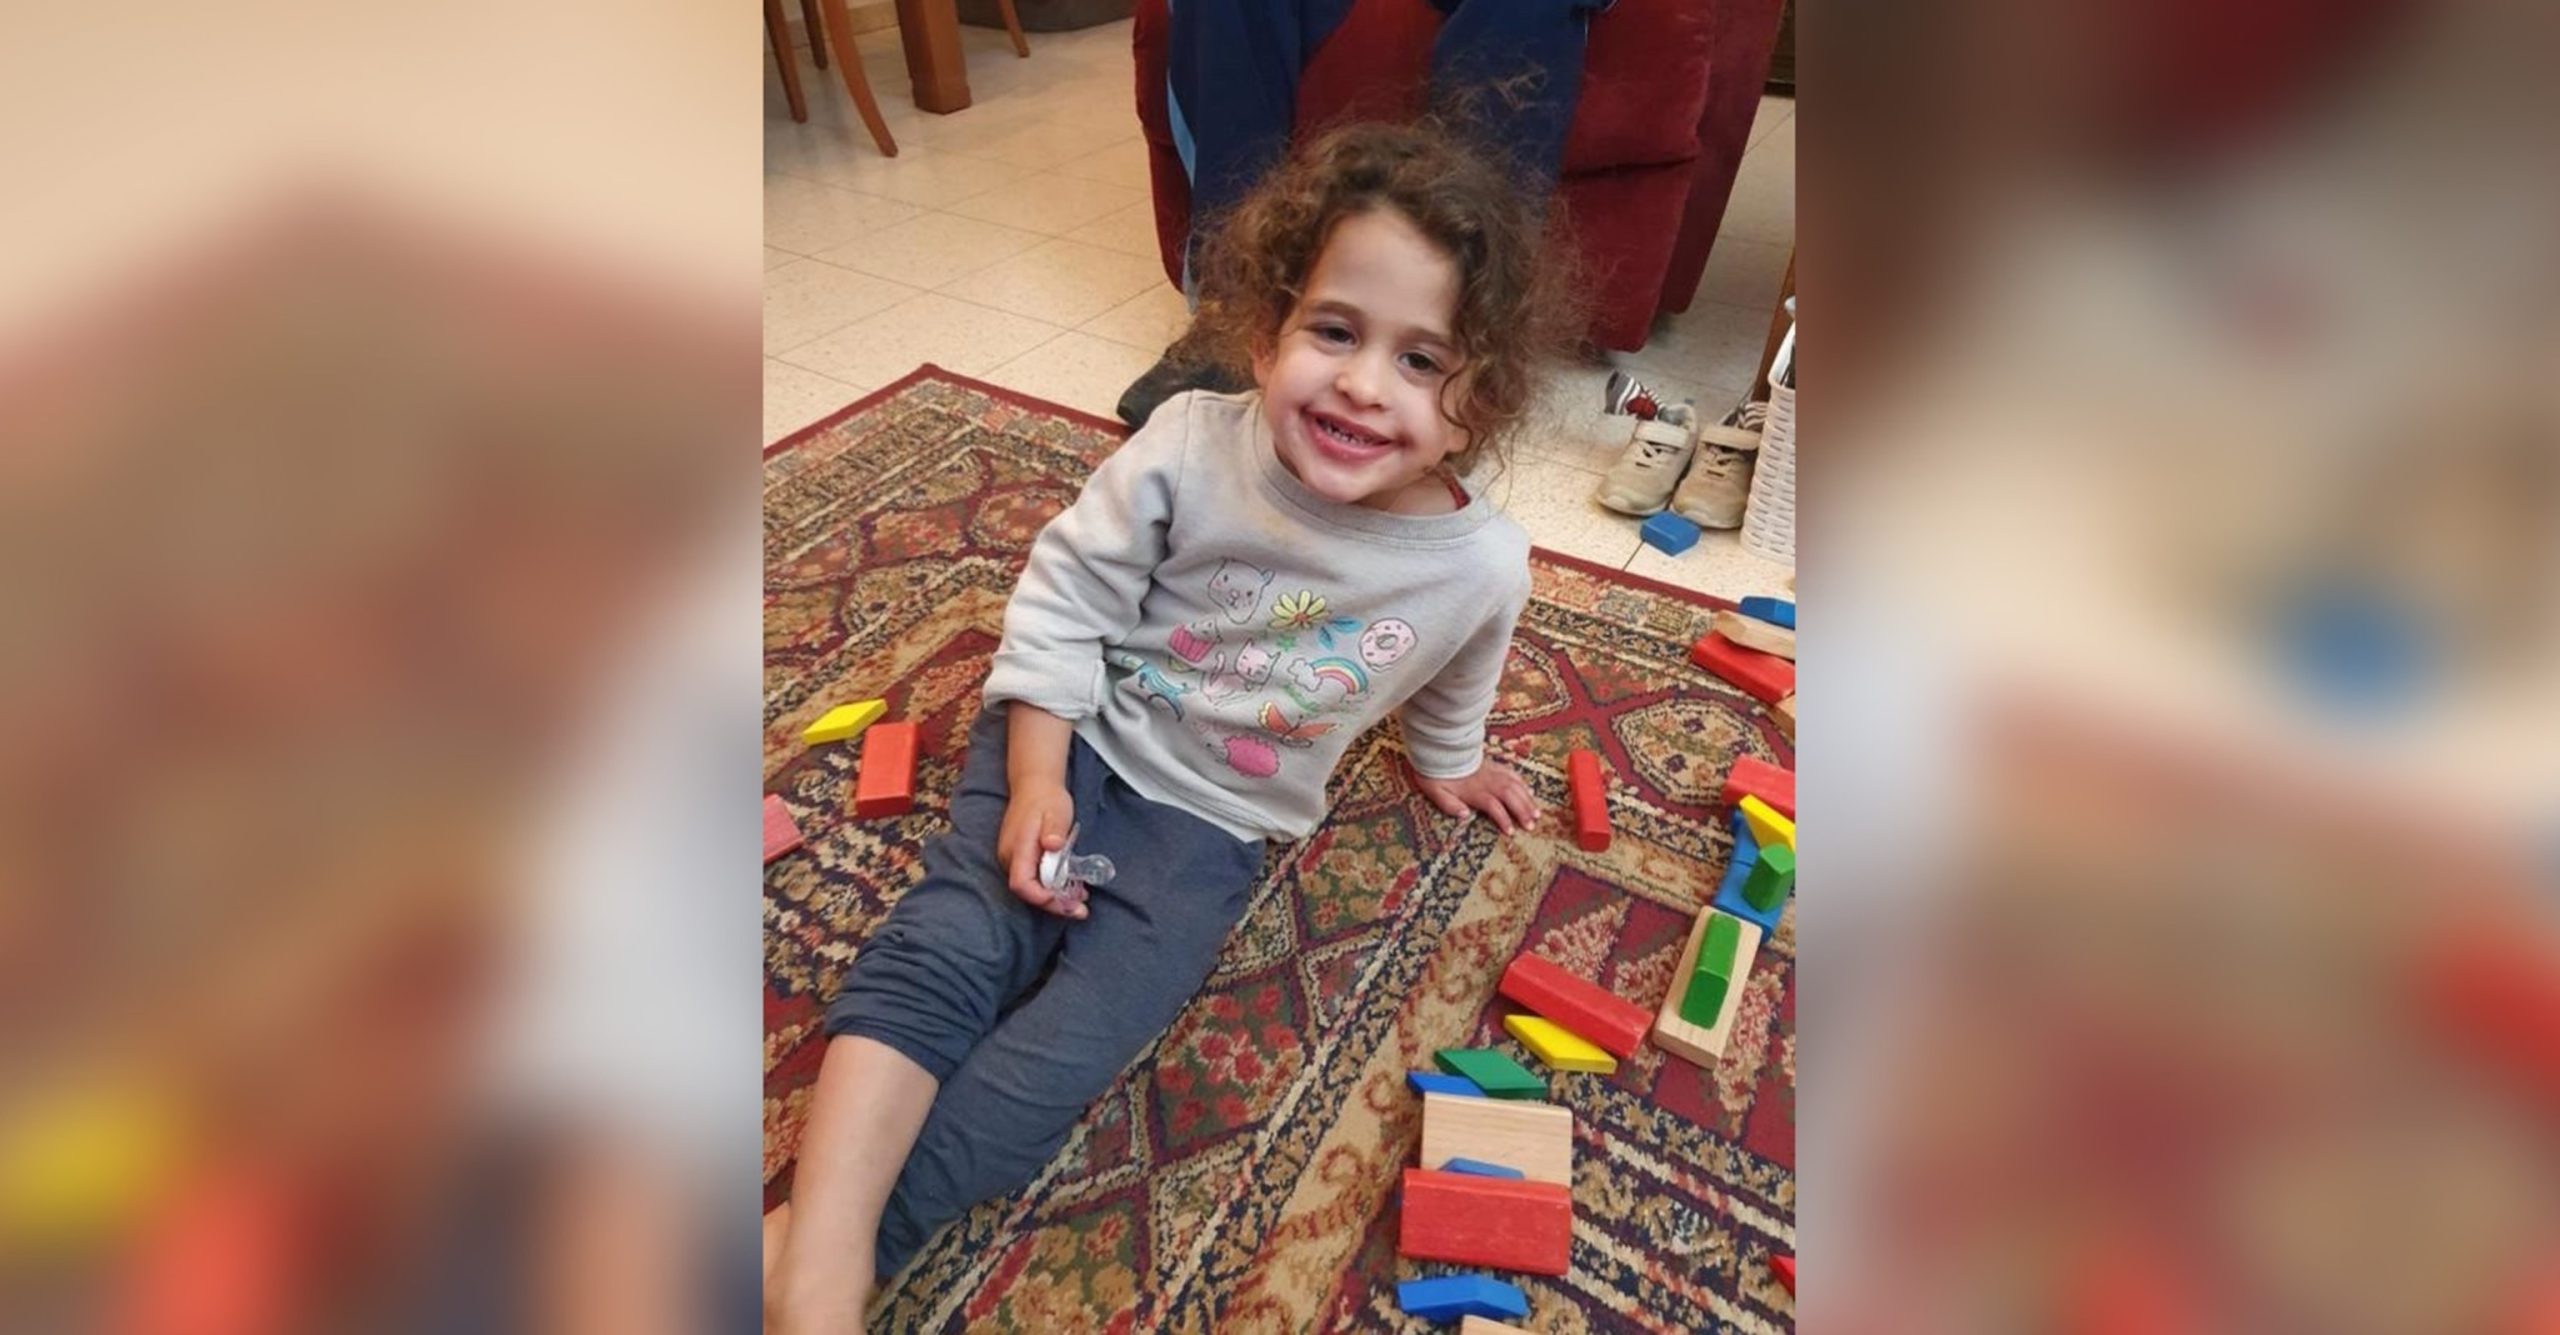 White House announces the release of a 4-year-old American child by Hamas, highlighting the opportunity for love and healing